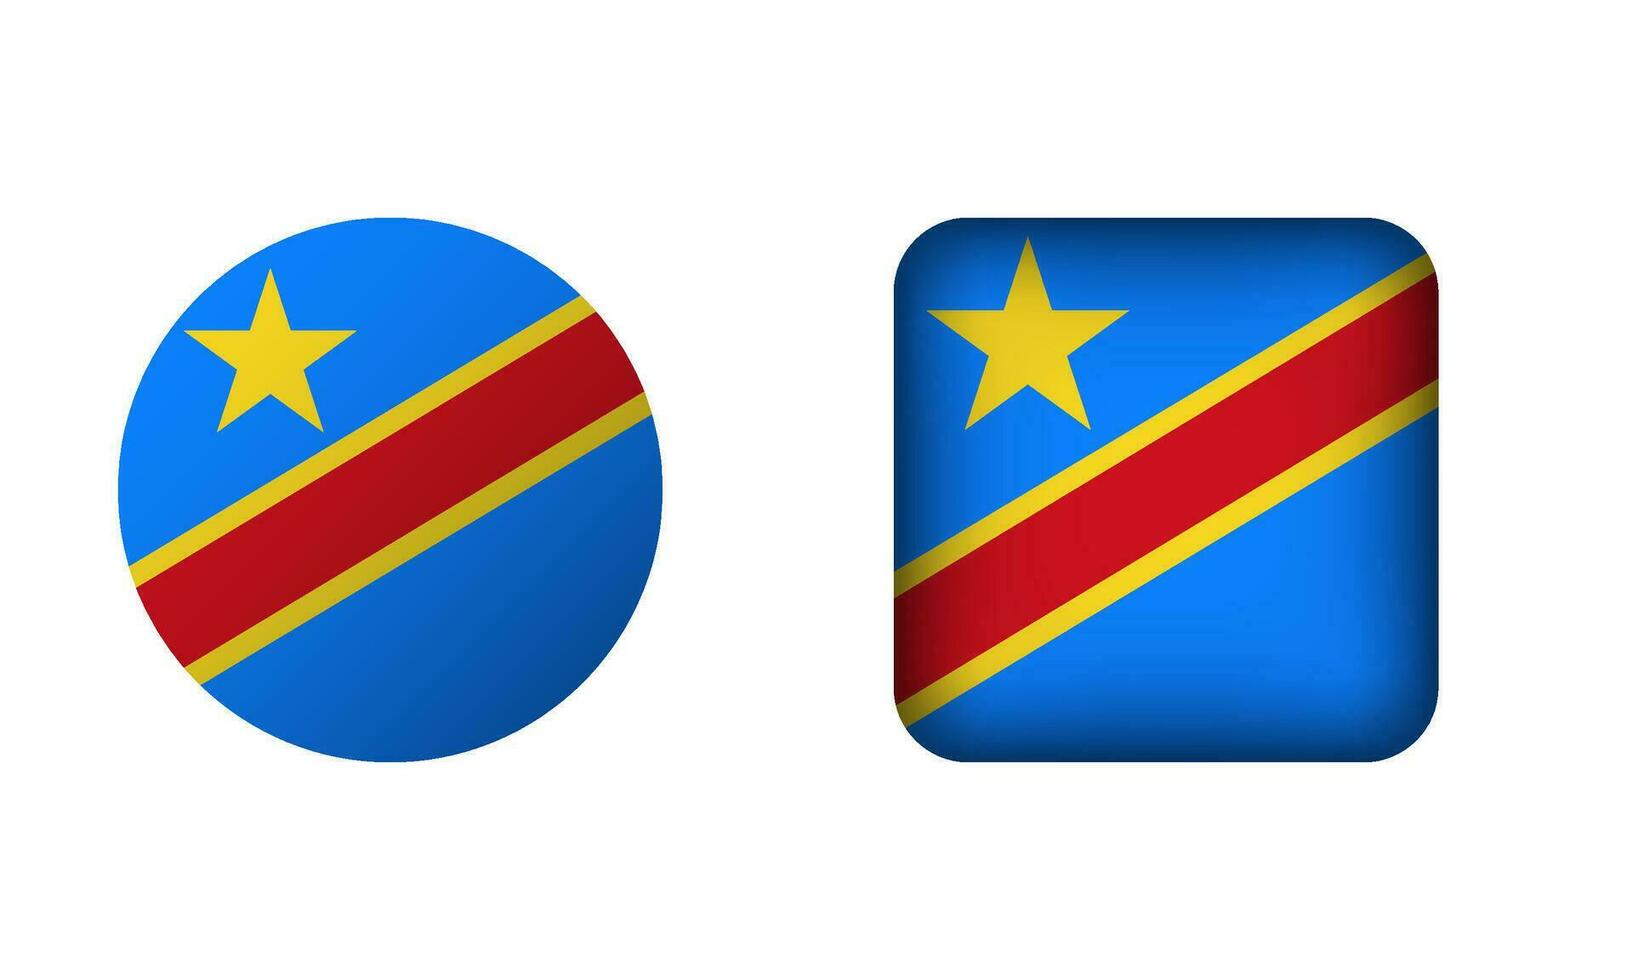 Flat Square and Circle Democratic Republic of the Congo National Flag Icons vector